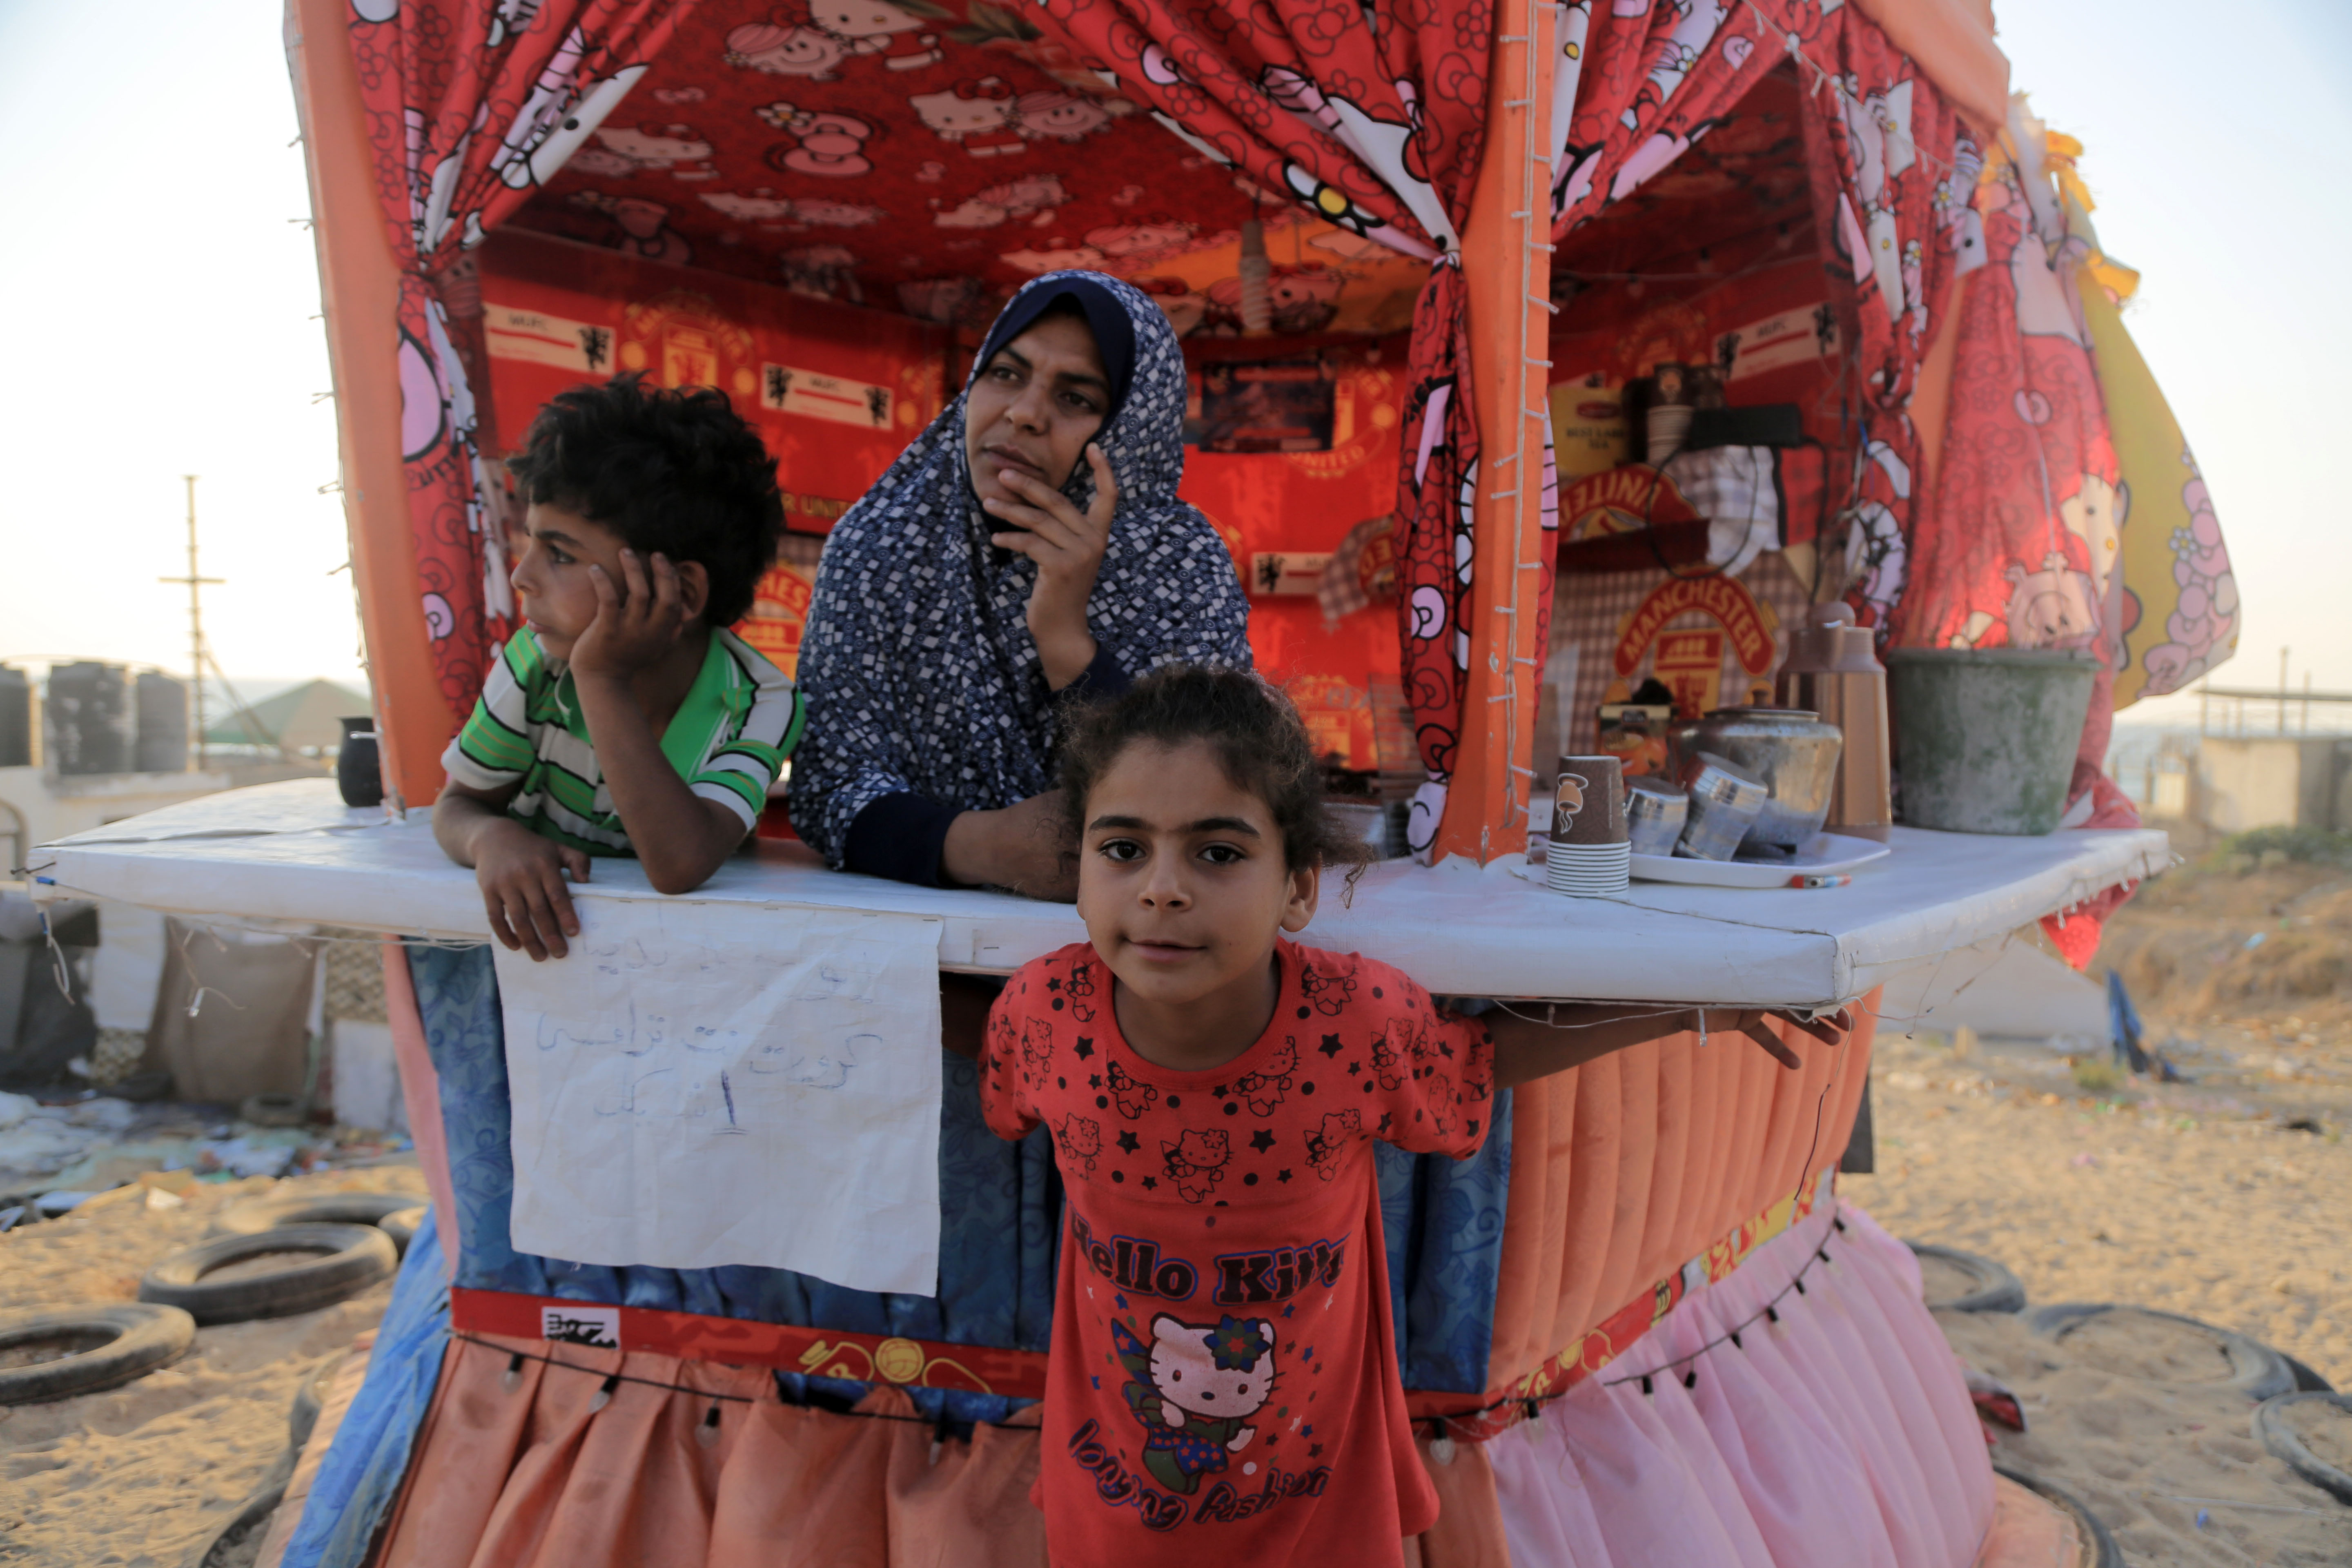  Umm Ahmad, Malak and Ahmad watch potential future customers walk past their tea and coffee shack. It is almost time to prepare their own iftar meal.